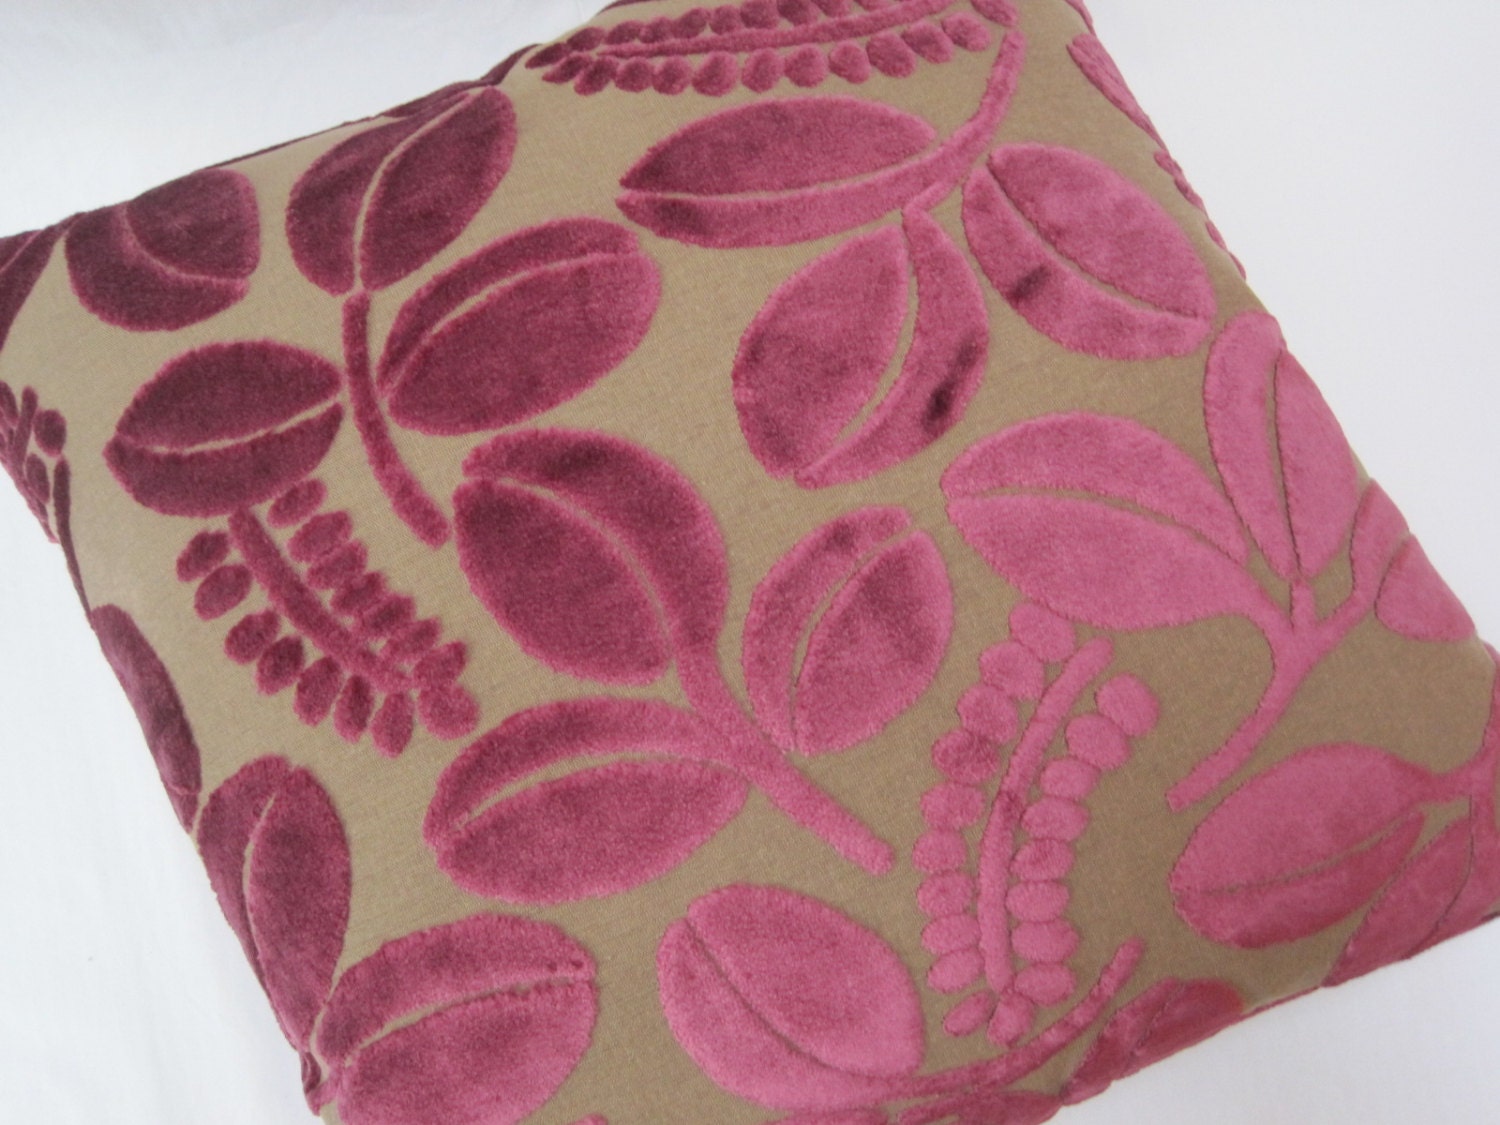 Popular items for square cushion cover on Etsy